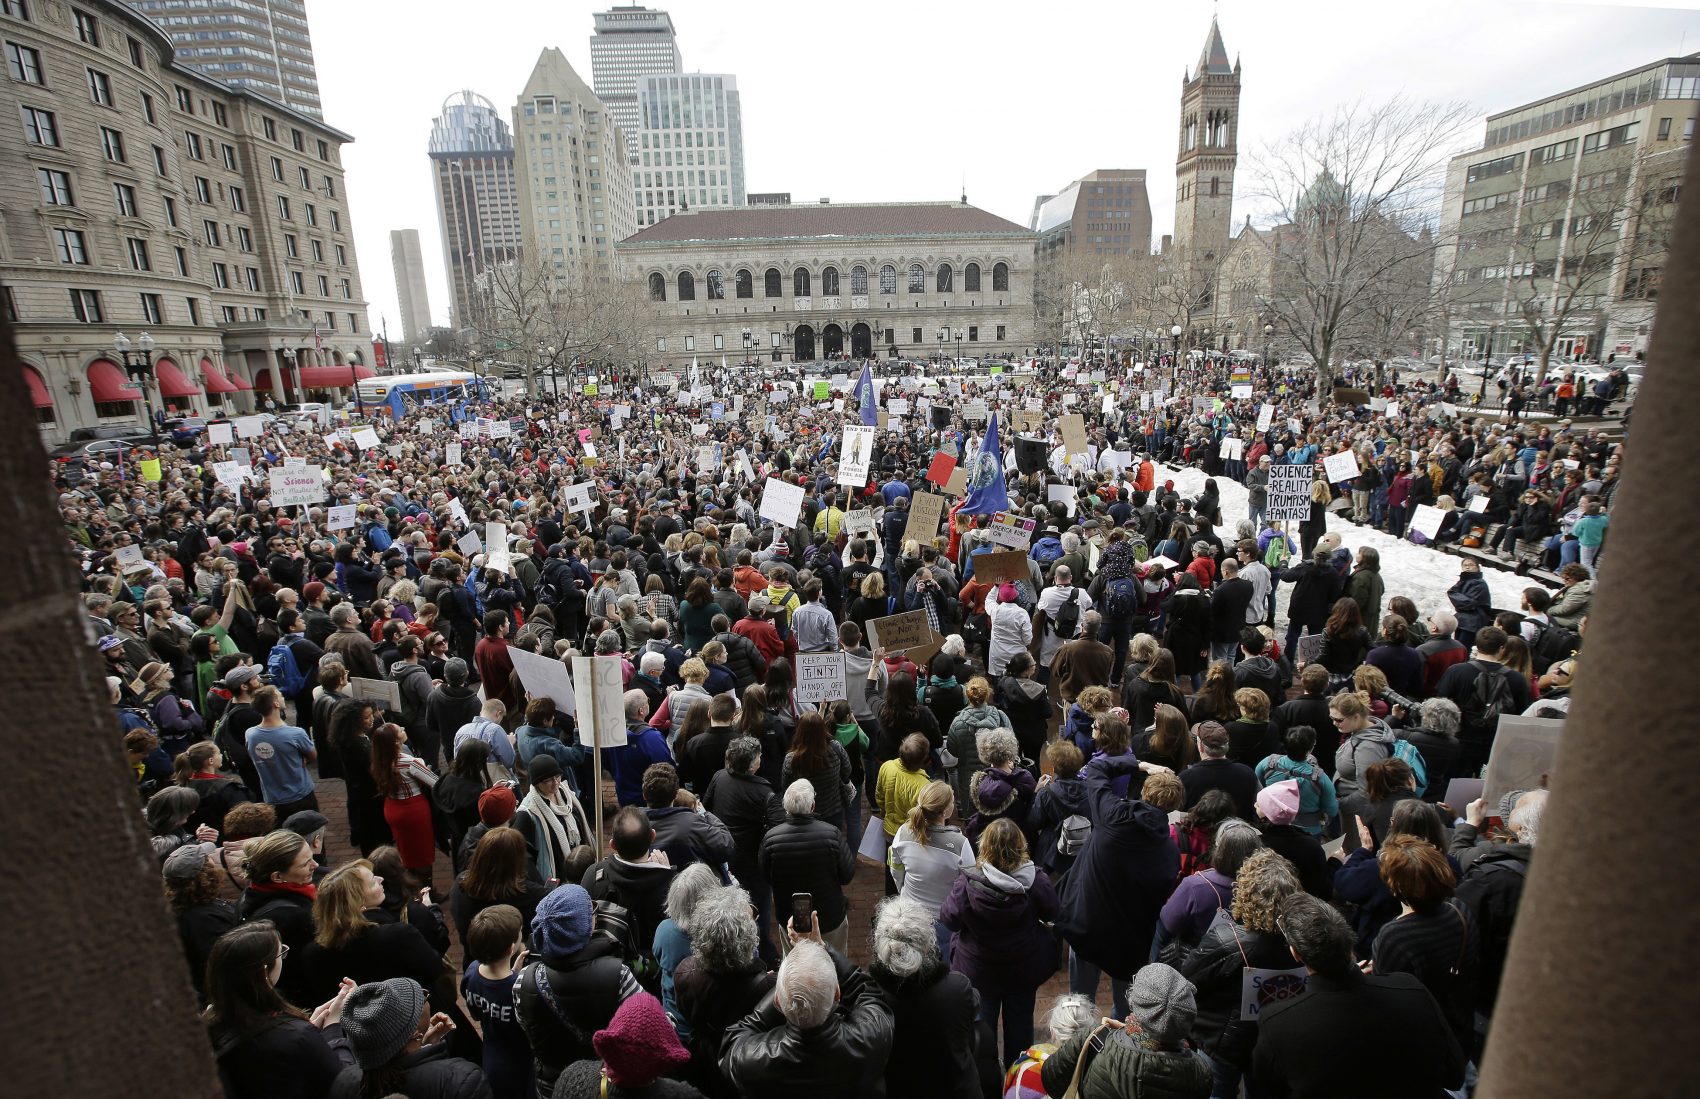 The &quot;Stand Up for Science&quot; rally Sunday in Copley Square (Steven Senne/AP)